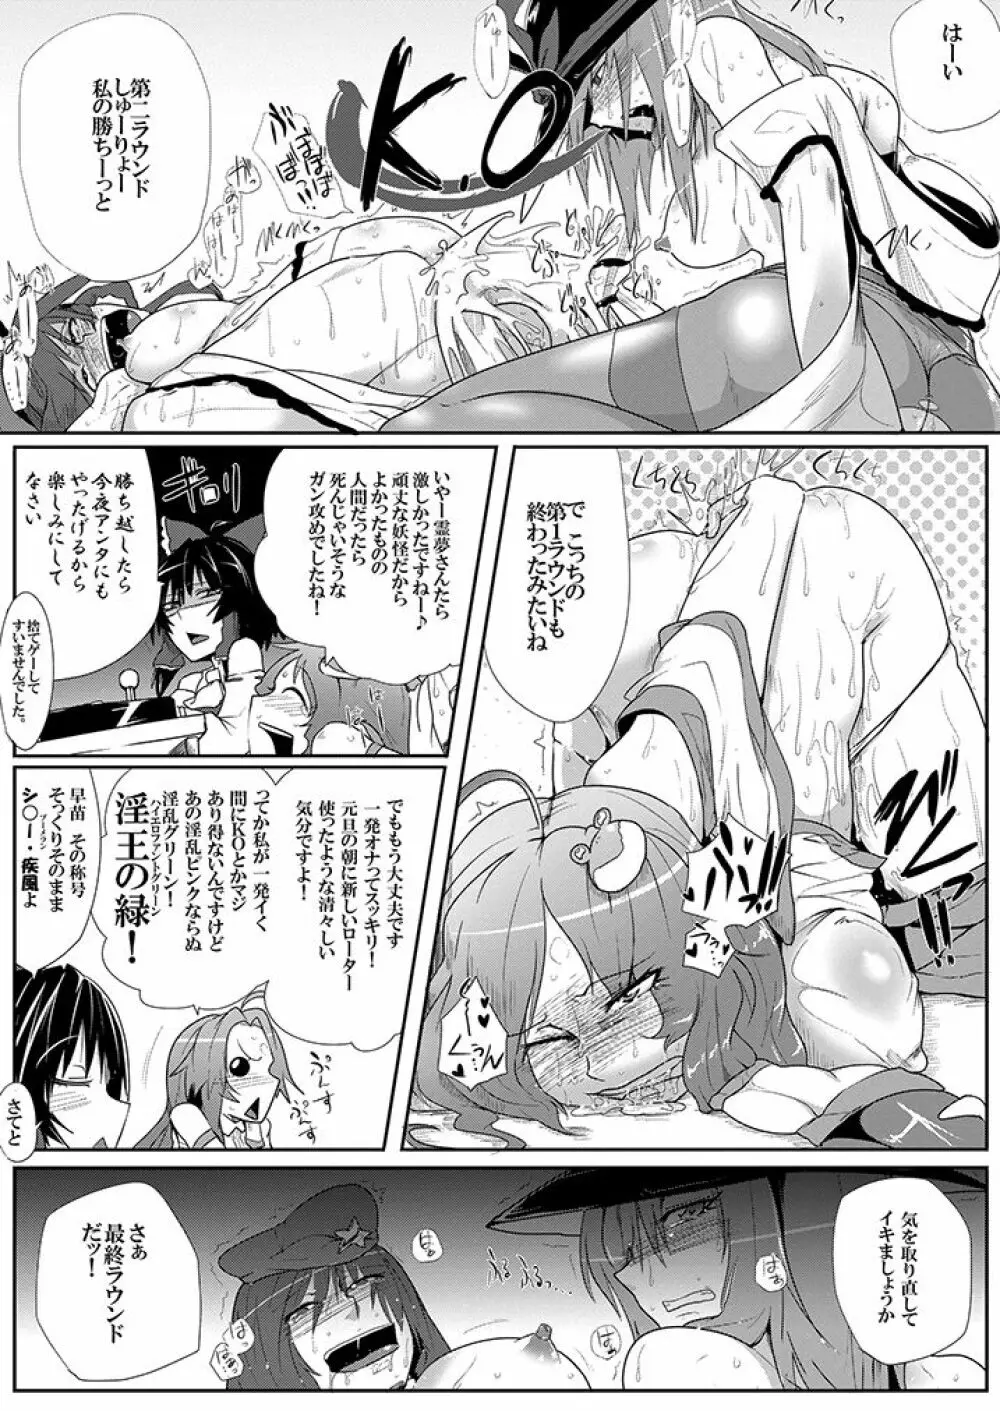 SAKUYA MAID in HEAVEN/ALL IN 1 - page403